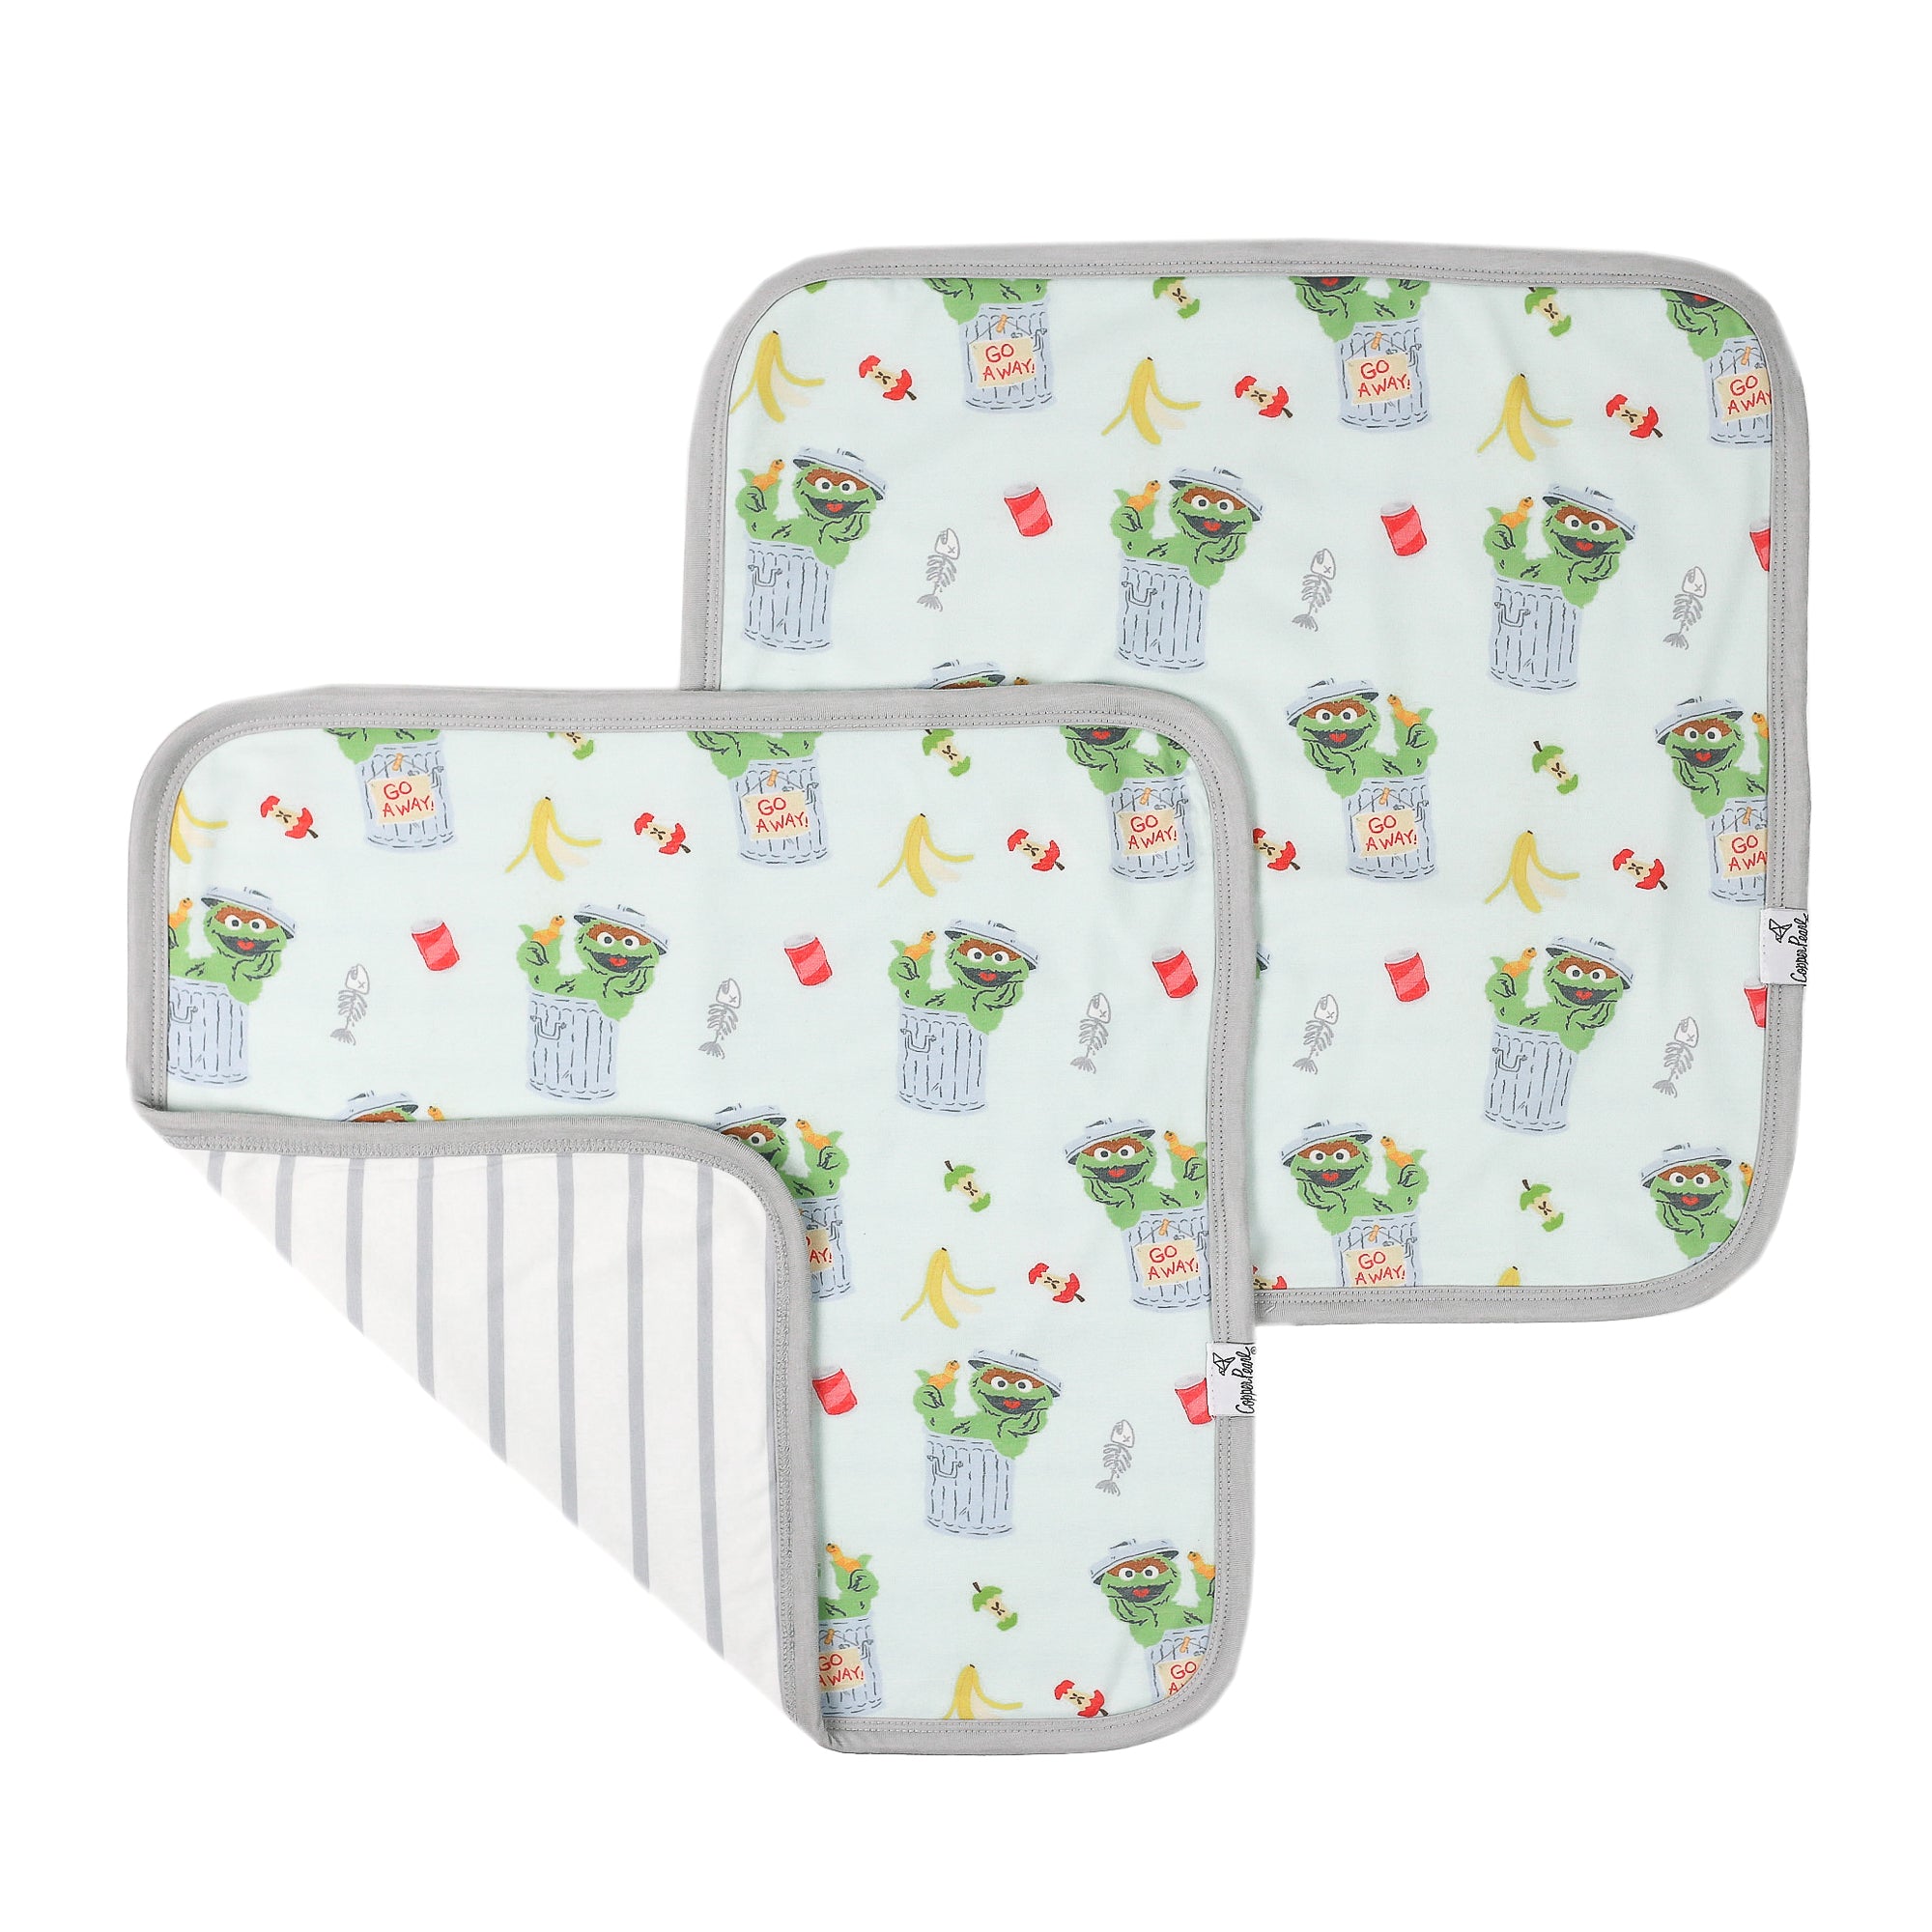 Three-Layer Security Blanket Set - Oscar the Grouch